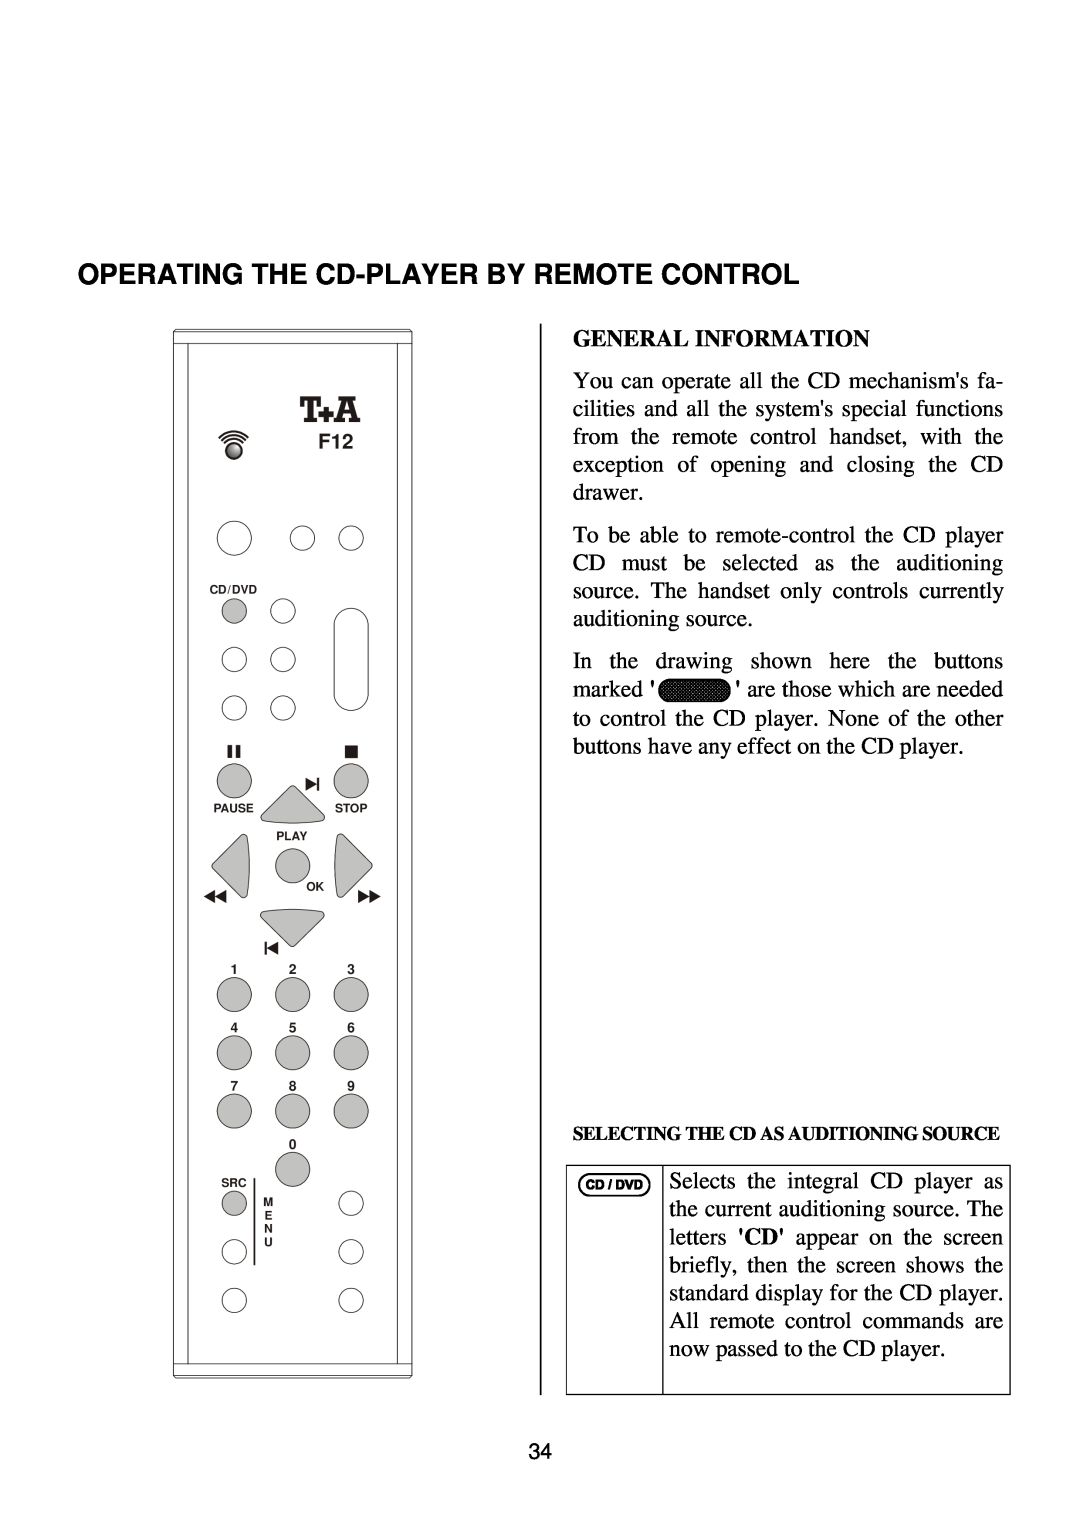 T+A Elektroakustik K1 CD-RECEIVER operating instructions Operating The Cd-Playerby Remote Control 